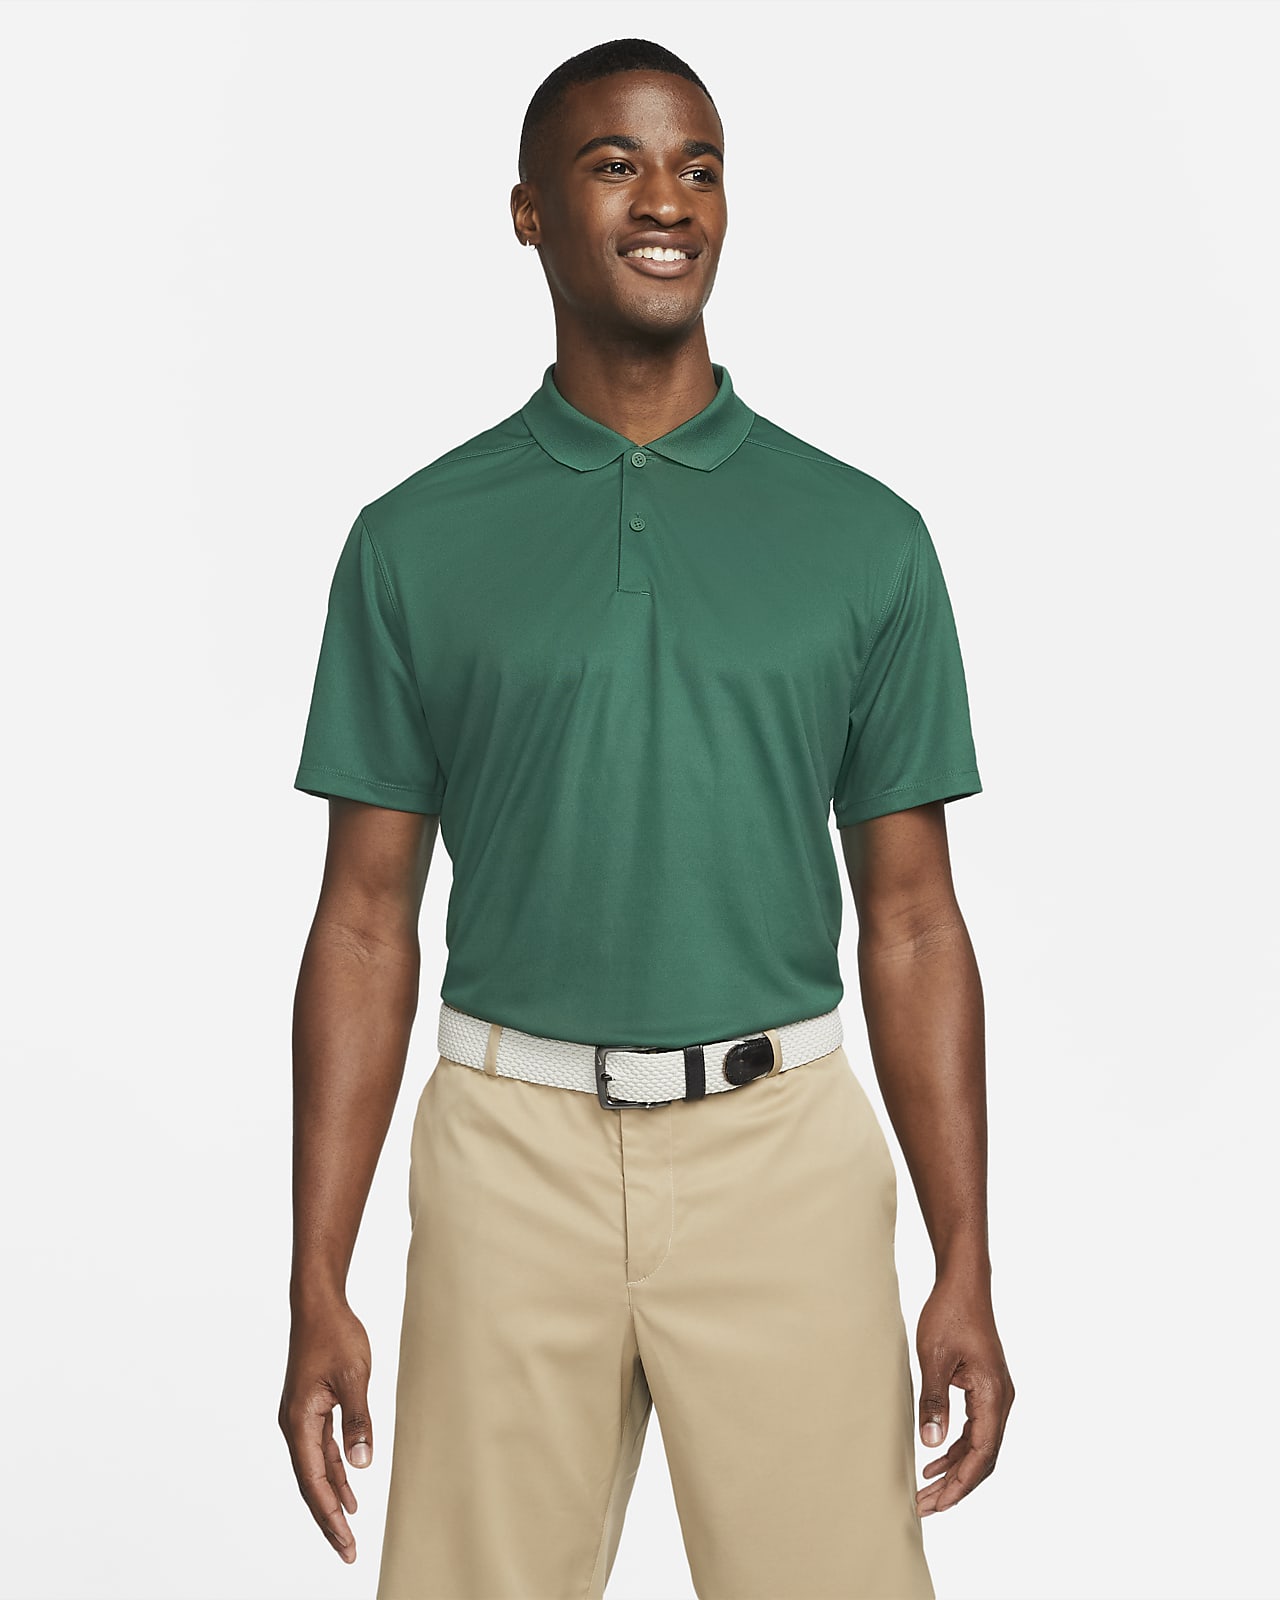 Nike Dri-FIT Colorblock Icon Modern Fit Polo, Product